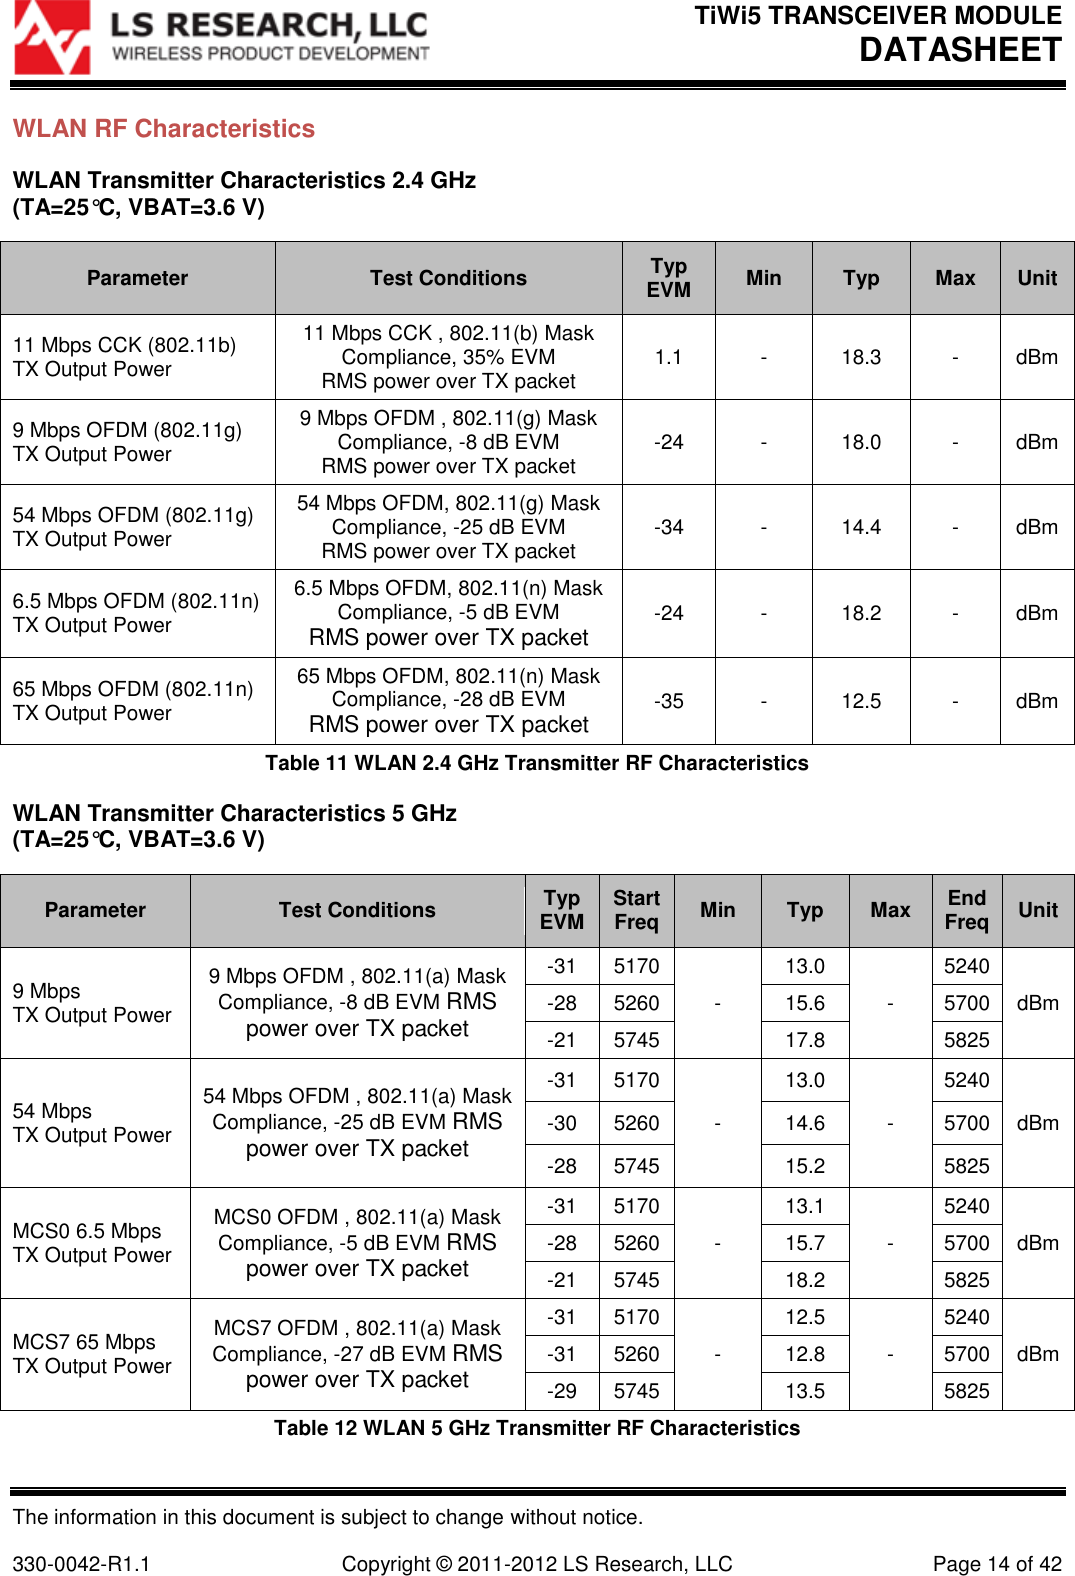 TiWi5 TRANSCEIVER MODULE DATASHEET  The information in this document is subject to change without notice.  330-0042-R1.1    Copyright © 2011-2012 LS Research, LLC  Page 14 of 42 WLAN RF Characteristics WLAN Transmitter Characteristics 2.4 GHz (TA=25°C, VBAT=3.6 V) Parameter Test Conditions Typ EVM Min Typ Max Unit 11 Mbps CCK (802.11b) TX Output Power  11 Mbps CCK , 802.11(b) Mask Compliance, 35% EVM RMS power over TX packet 1.1 - 18.3 - dBm 9 Mbps OFDM (802.11g) TX Output Power  9 Mbps OFDM , 802.11(g) Mask Compliance, -8 dB EVM RMS power over TX packet -24 - 18.0 - dBm 54 Mbps OFDM (802.11g) TX Output Power 54 Mbps OFDM, 802.11(g) Mask Compliance, -25 dB EVM RMS power over TX packet -34 - 14.4 - dBm 6.5 Mbps OFDM (802.11n) TX Output Power 6.5 Mbps OFDM, 802.11(n) Mask Compliance, -5 dB EVM RMS power over TX packet -24 - 18.2 - dBm 65 Mbps OFDM (802.11n) TX Output Power 65 Mbps OFDM, 802.11(n) Mask Compliance, -28 dB EVM RMS power over TX packet -35 - 12.5 - dBm Table 11 WLAN 2.4 GHz Transmitter RF Characteristics WLAN Transmitter Characteristics 5 GHz (TA=25°C, VBAT=3.6 V) Parameter Test Conditions Typ EVM Start Freq Min Typ Max End Freq Unit 9 Mbps TX Output Power  9 Mbps OFDM , 802.11(a) Mask Compliance, -8 dB EVM RMS power over TX packet -31 5170 - 13.0 - 5240 dBm -28 5260 15.6 5700 -21 5745 17.8 5825 54 Mbps TX Output Power  54 Mbps OFDM , 802.11(a) Mask Compliance, -25 dB EVM RMS power over TX packet -31 5170 - 13.0 - 5240 dBm -30 5260 14.6 5700 -28 5745 15.2 5825 MCS0 6.5 Mbps TX Output Power  MCS0 OFDM , 802.11(a) Mask Compliance, -5 dB EVM RMS power over TX packet -31 5170 - 13.1 - 5240 dBm -28 5260 15.7 5700 -21 5745 18.2 5825 MCS7 65 Mbps TX Output Power  MCS7 OFDM , 802.11(a) Mask Compliance, -27 dB EVM RMS power over TX packet -31 5170 - 12.5 - 5240 dBm -31 5260 12.8 5700 -29 5745 13.5 5825 Table 12 WLAN 5 GHz Transmitter RF Characteristics 